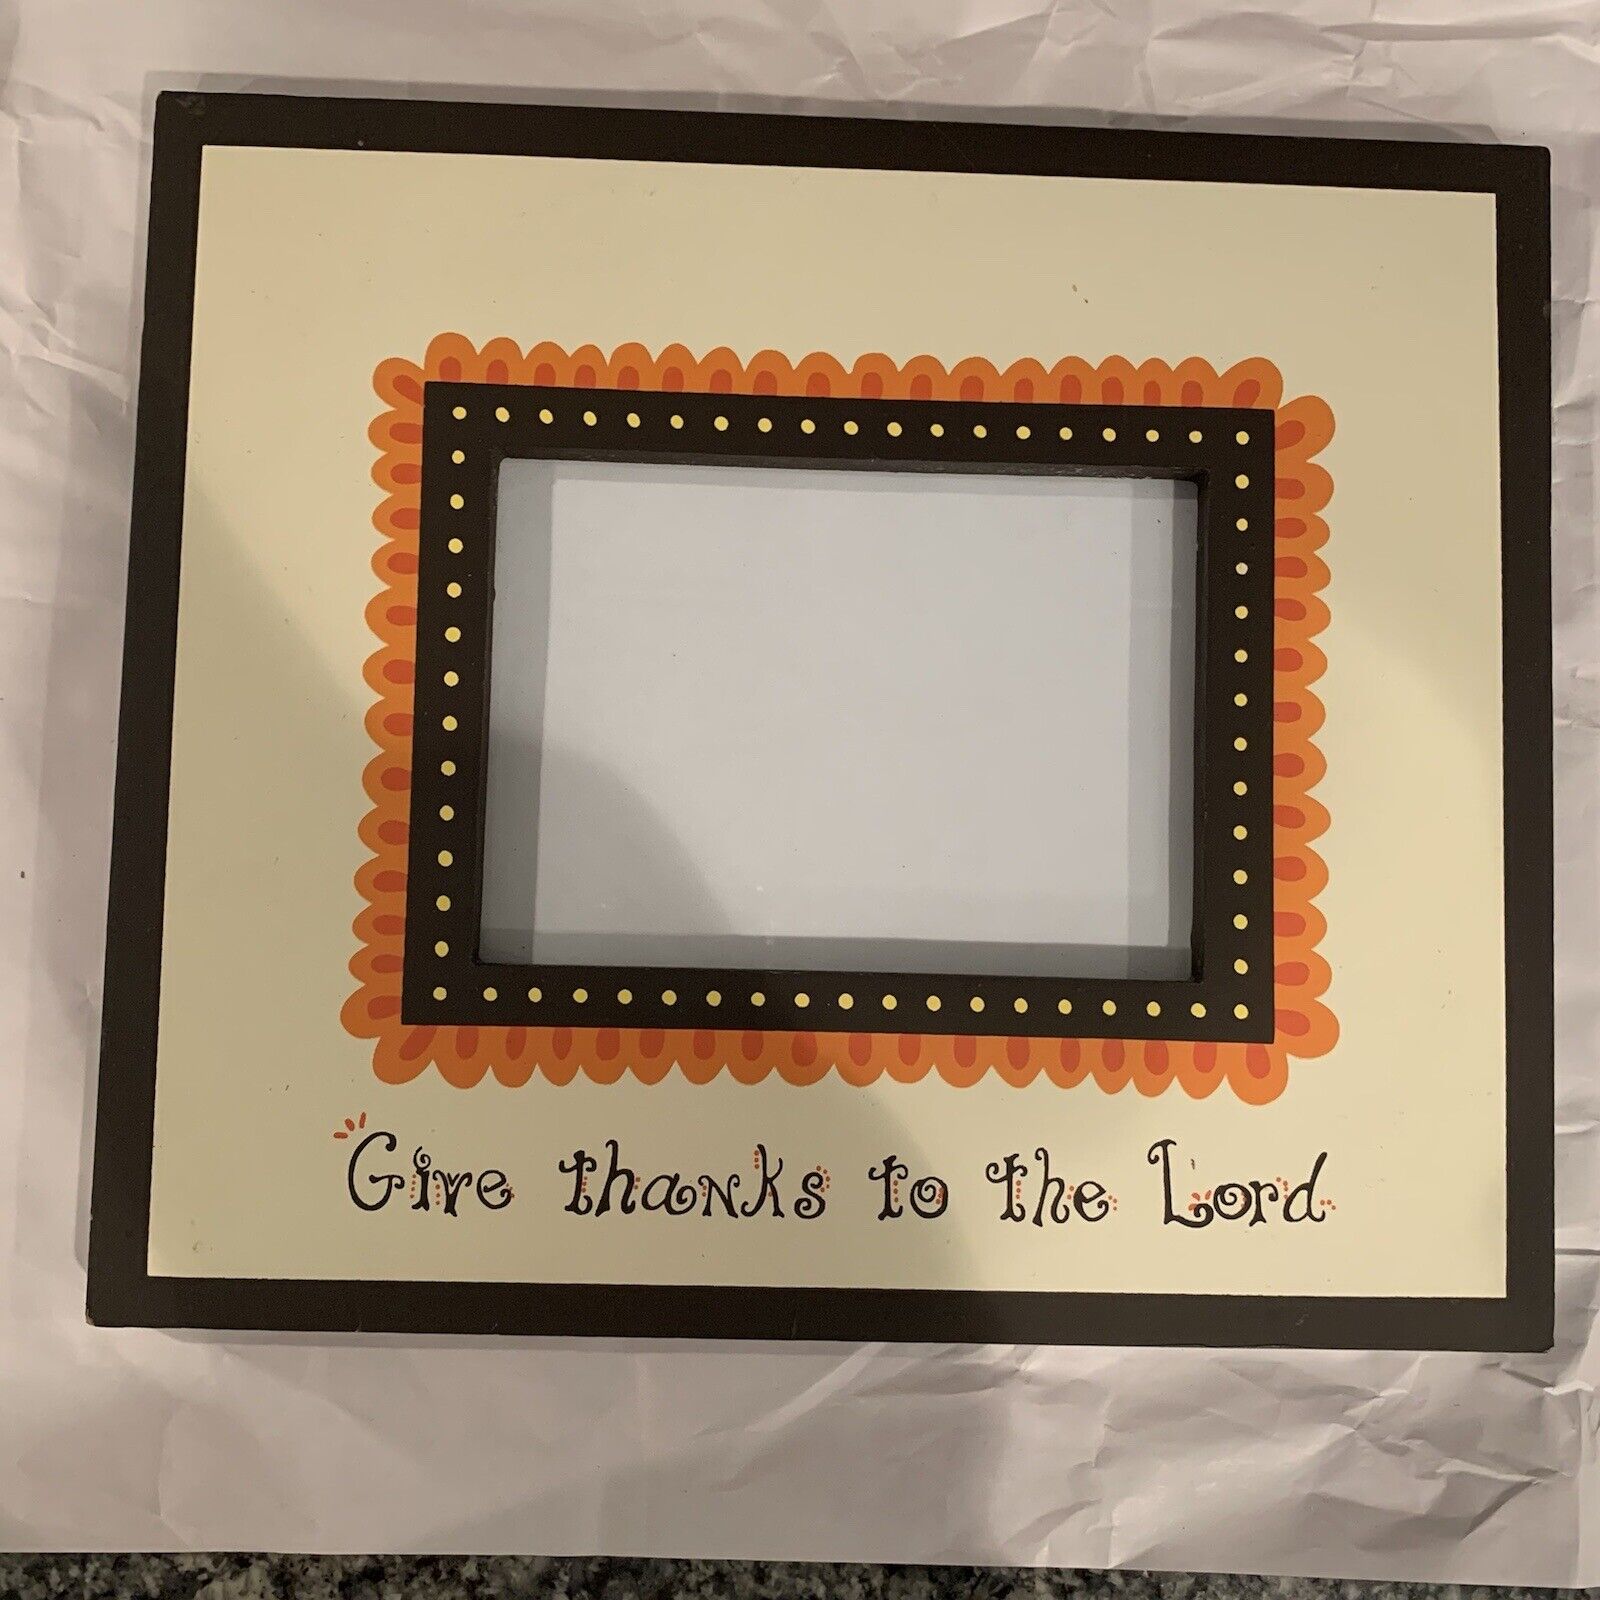 GLORY HAUS “Give Thanks To The Lord” Frame Brown Tan Orange 10”x12’